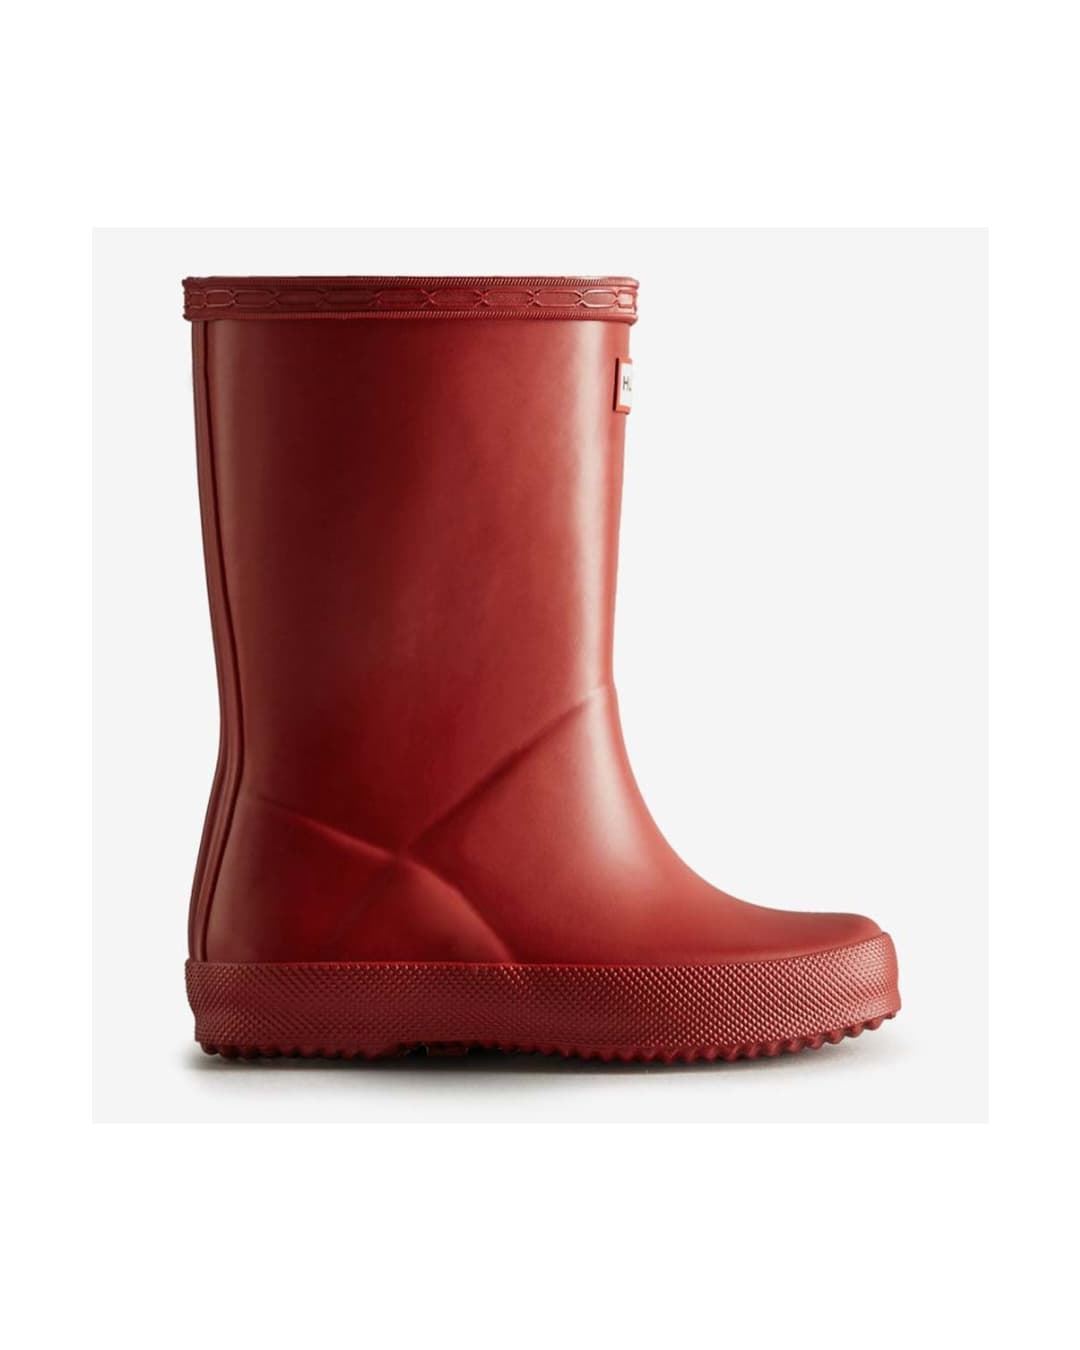 Hunter Rain Boots for Kids First Red - Image 2